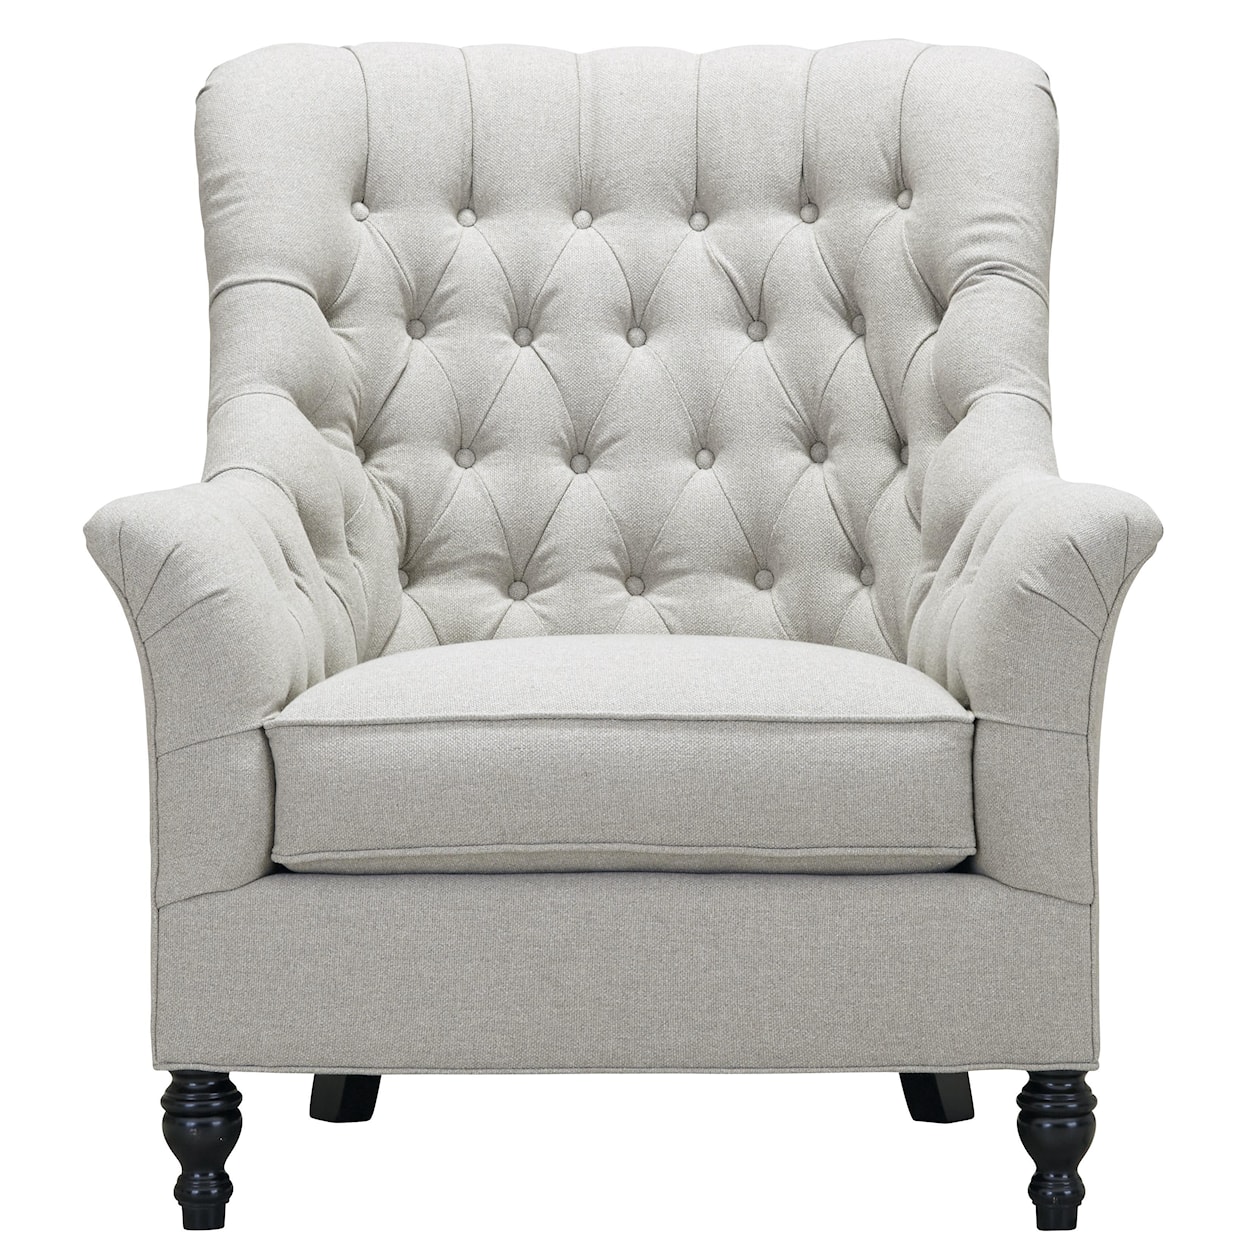 Southern Janie Upholstered Chair